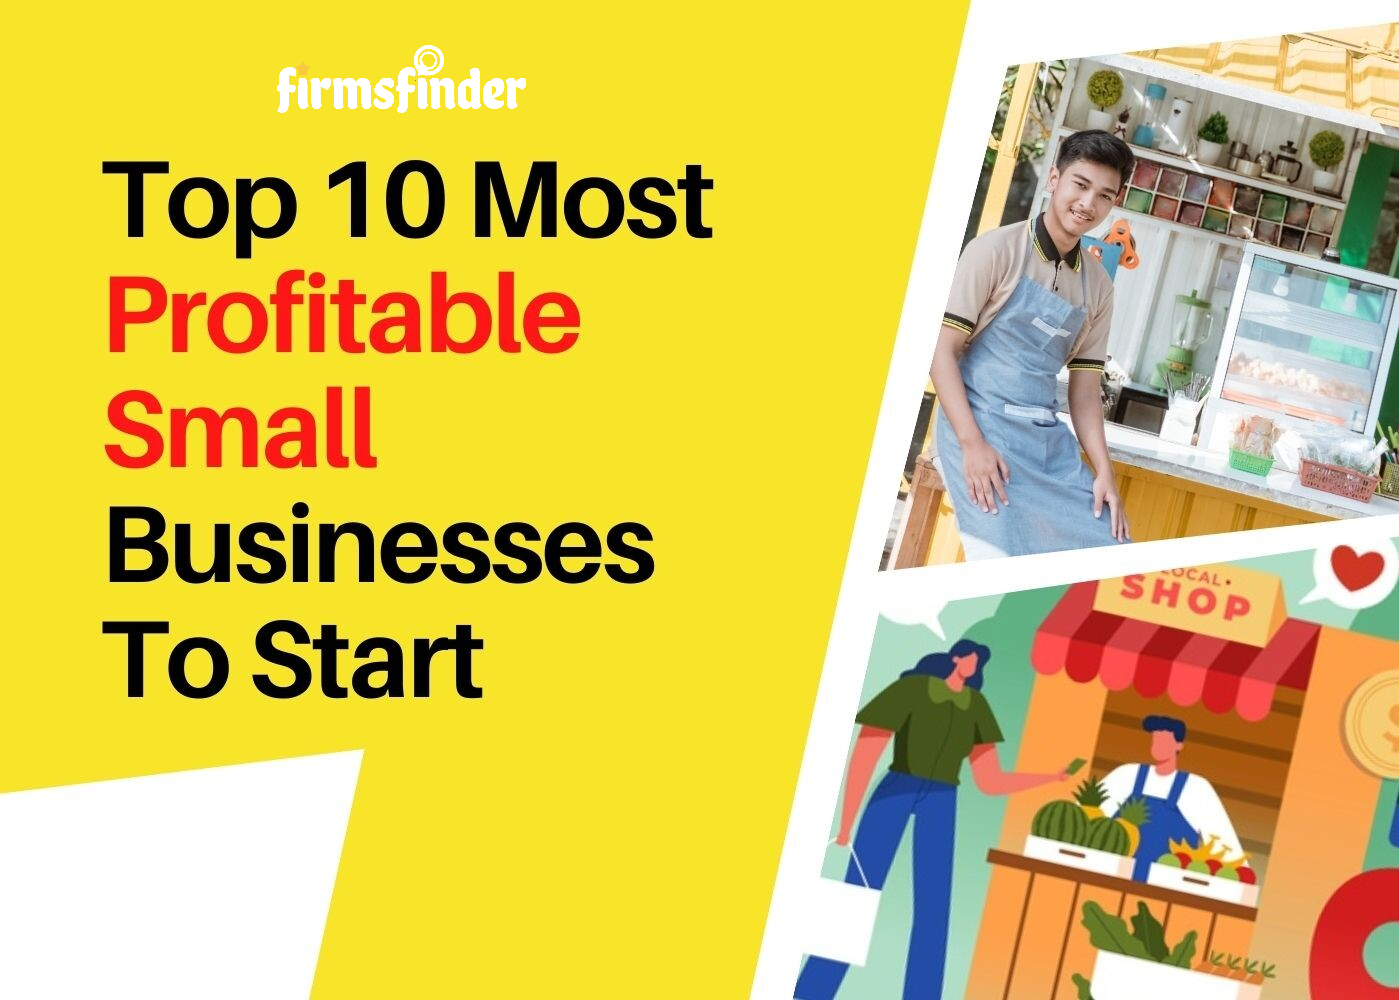 Top 10 Most Profitable Small Businesses To Start in 2022